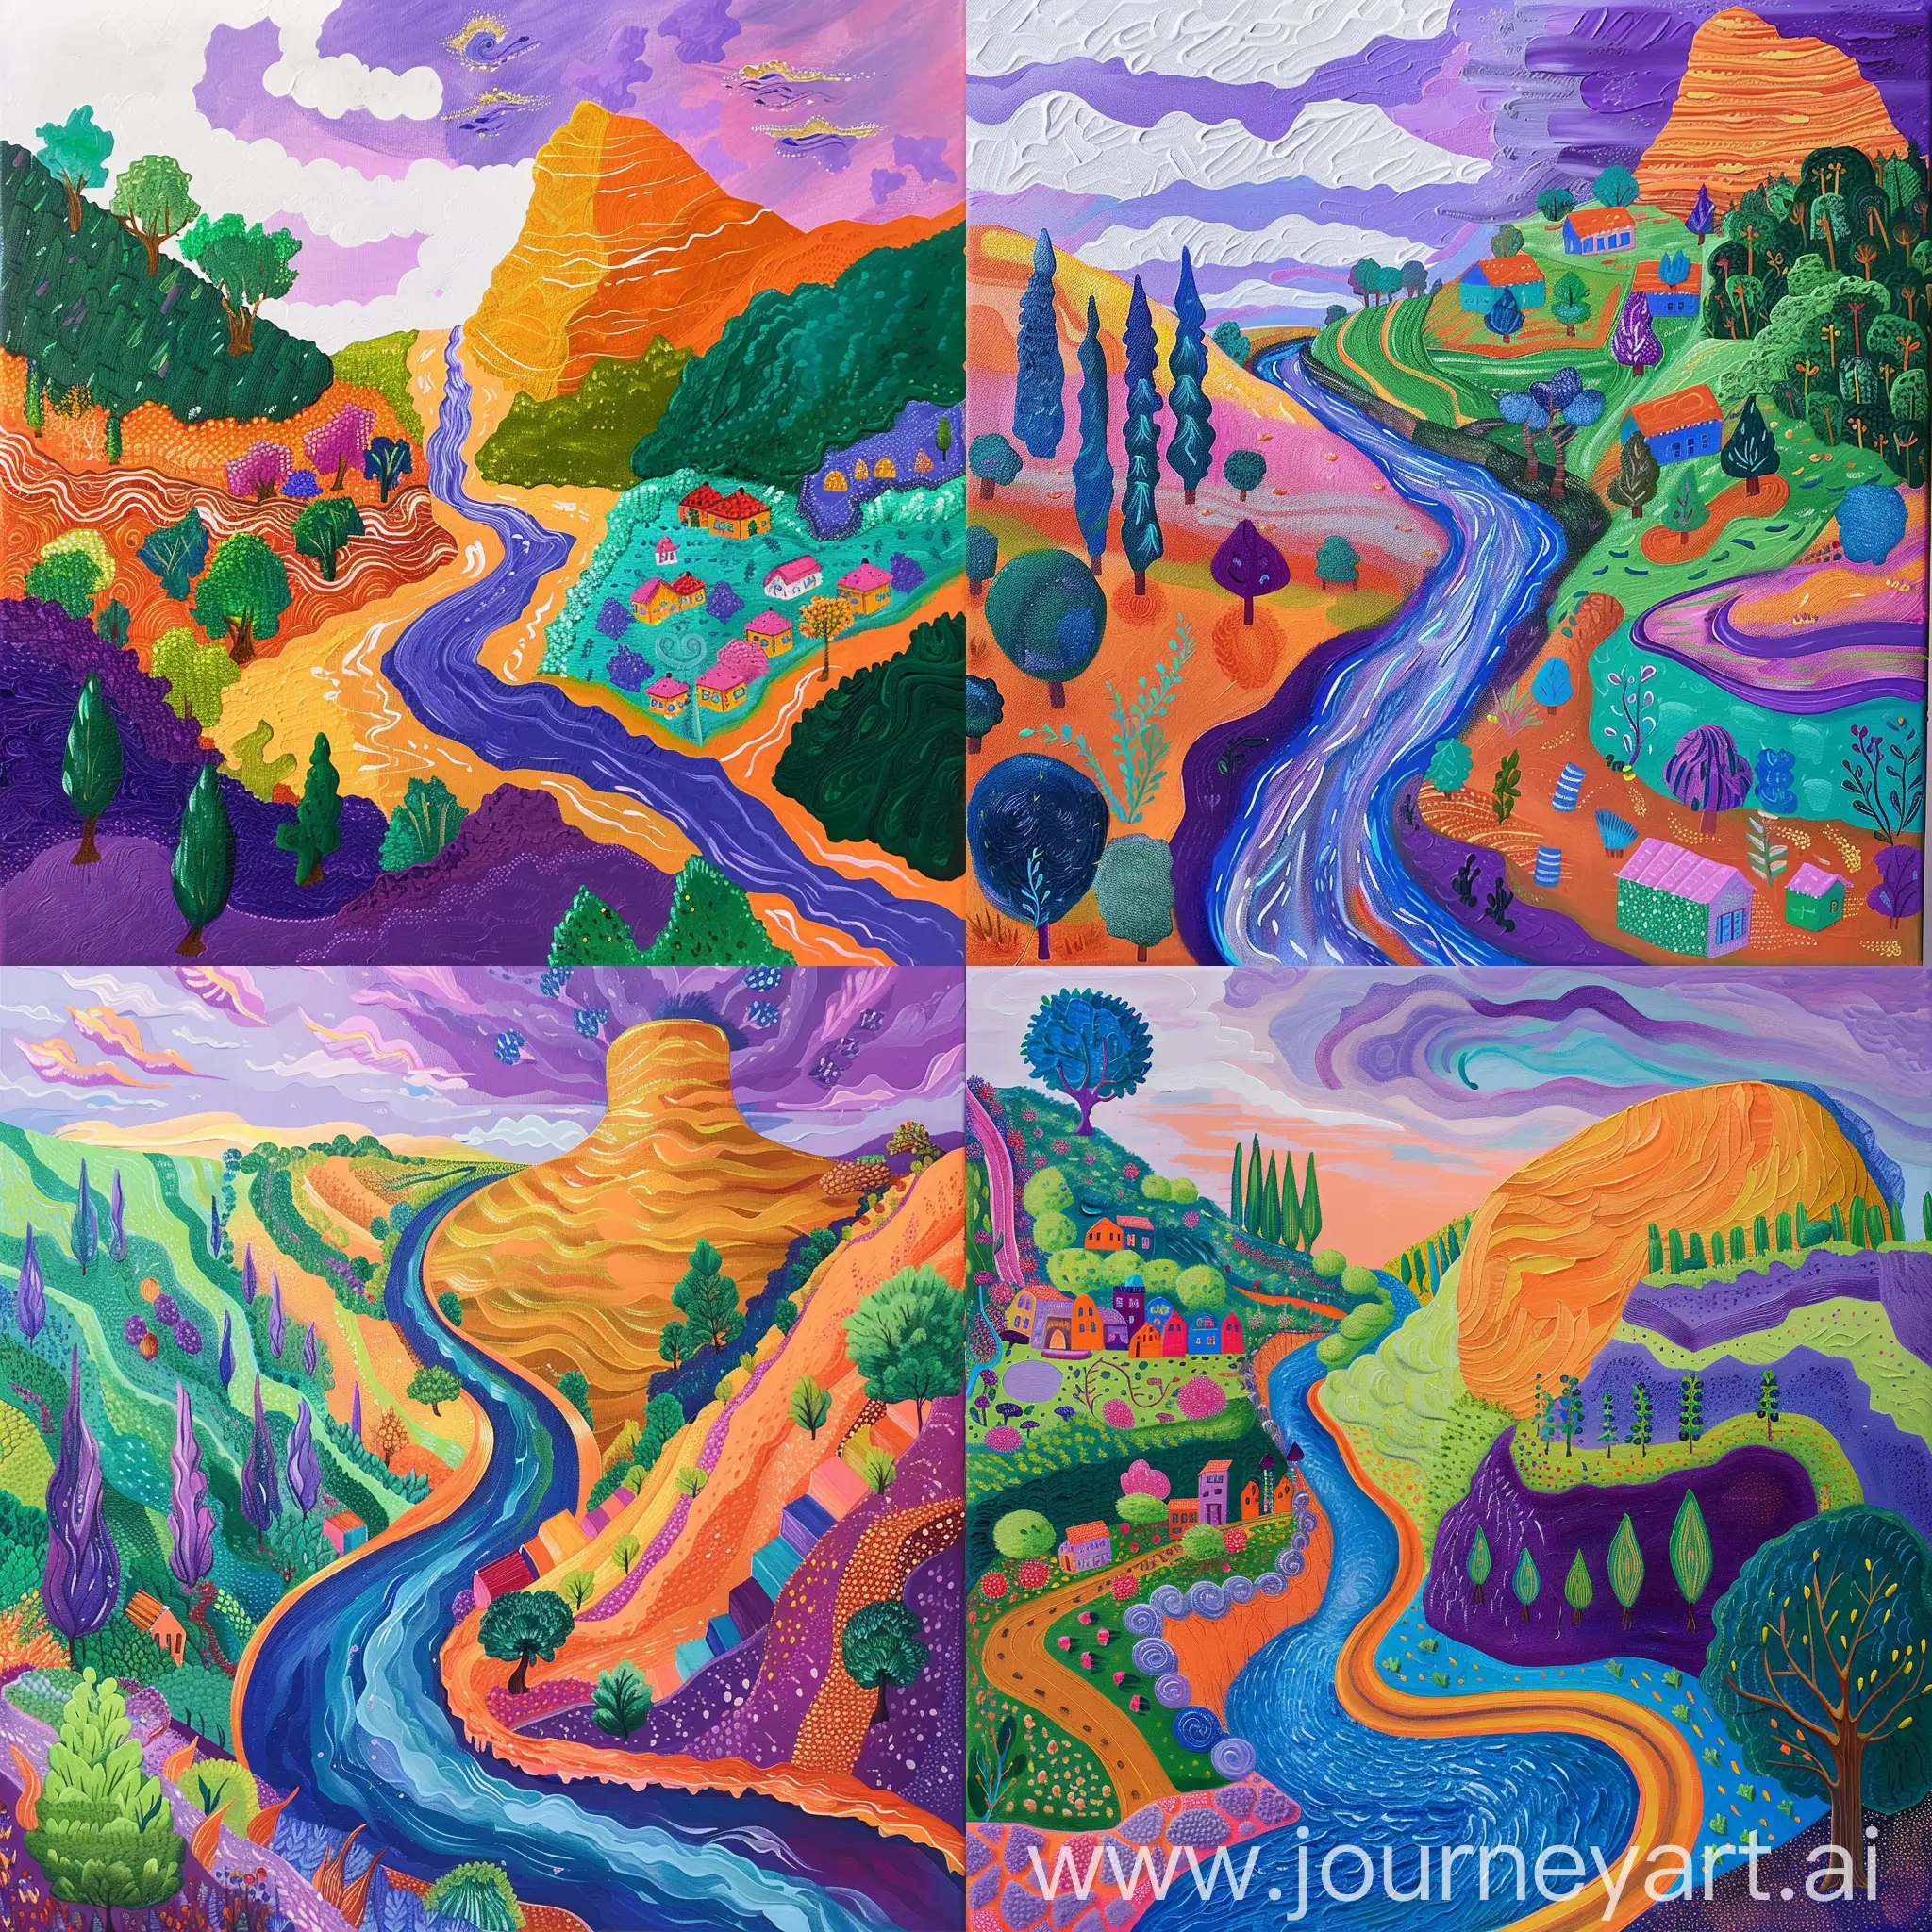 Whimsical-Landscape-Painting-Vibrant-River-Scene-with-Colorful-Village-and-Orange-Mountain